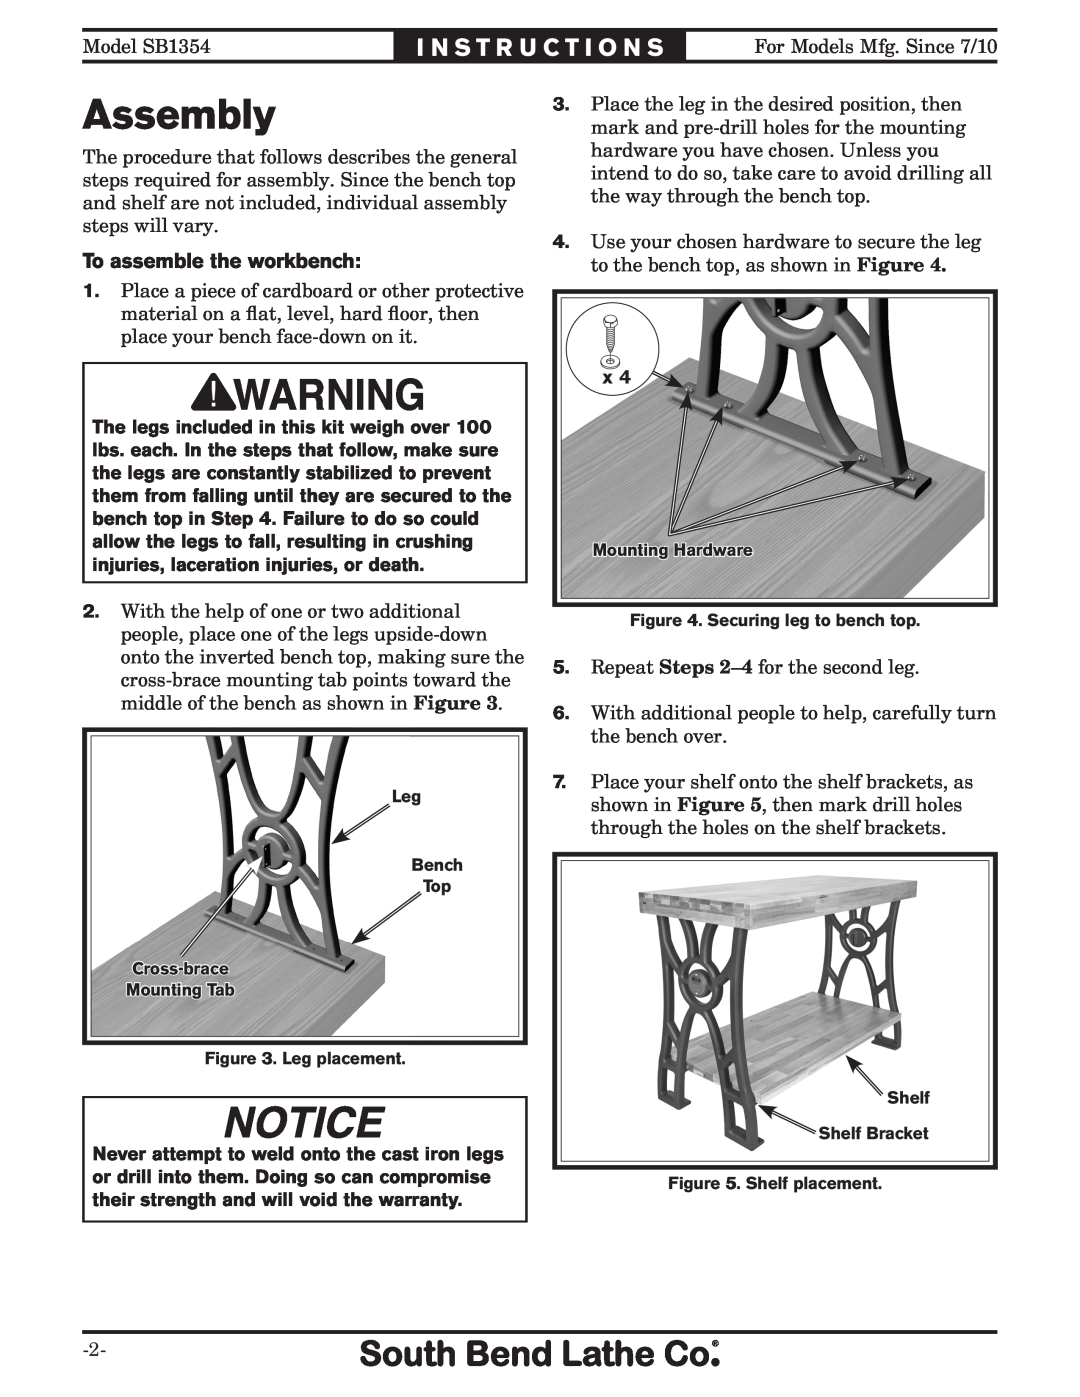 Southbend SB1354 instruction sheet Assembly, I N S T R U C T I O N S, To assemble the workbench 